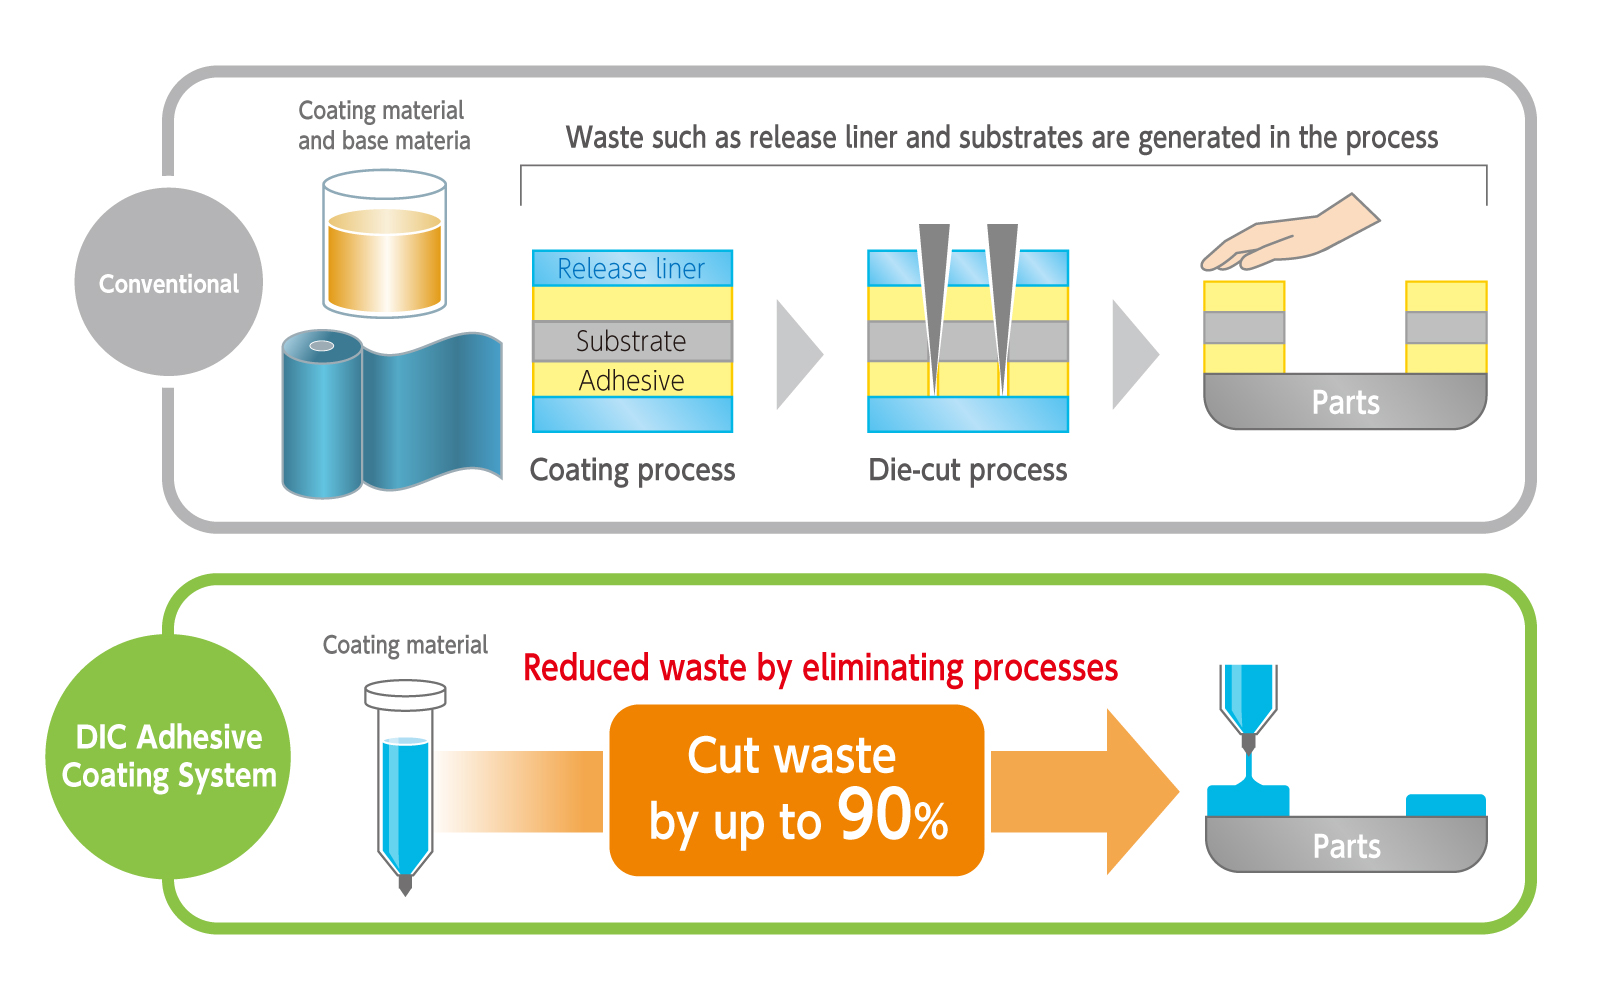 Waste can be cut by up to 90% by applying directly to parts